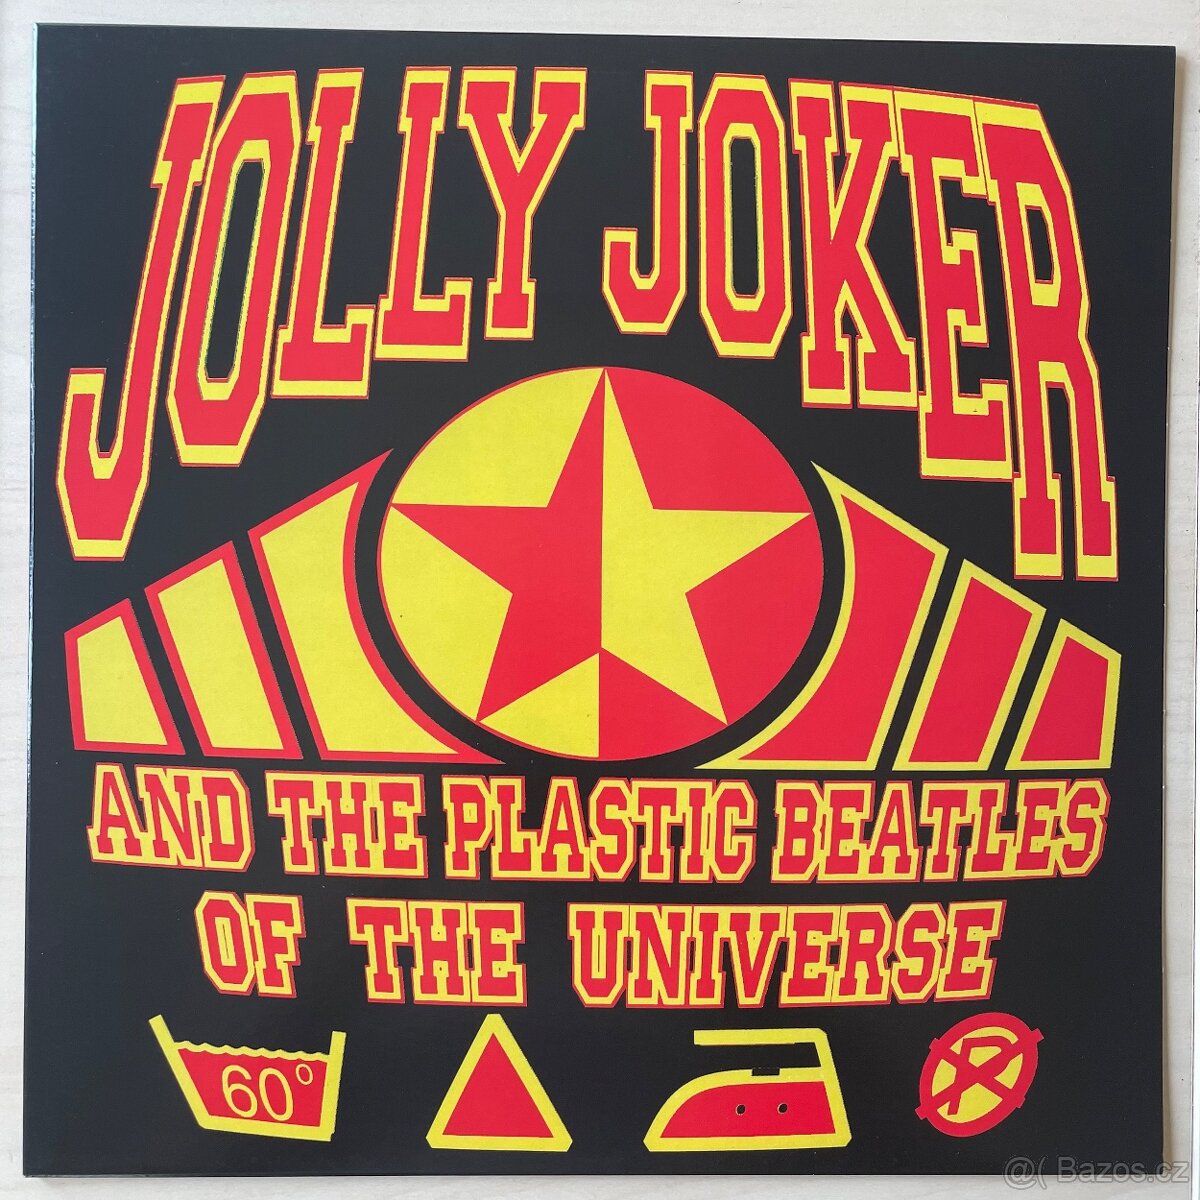 Jolly Joker And The Plastic Beatles Of The Universe – Heavy